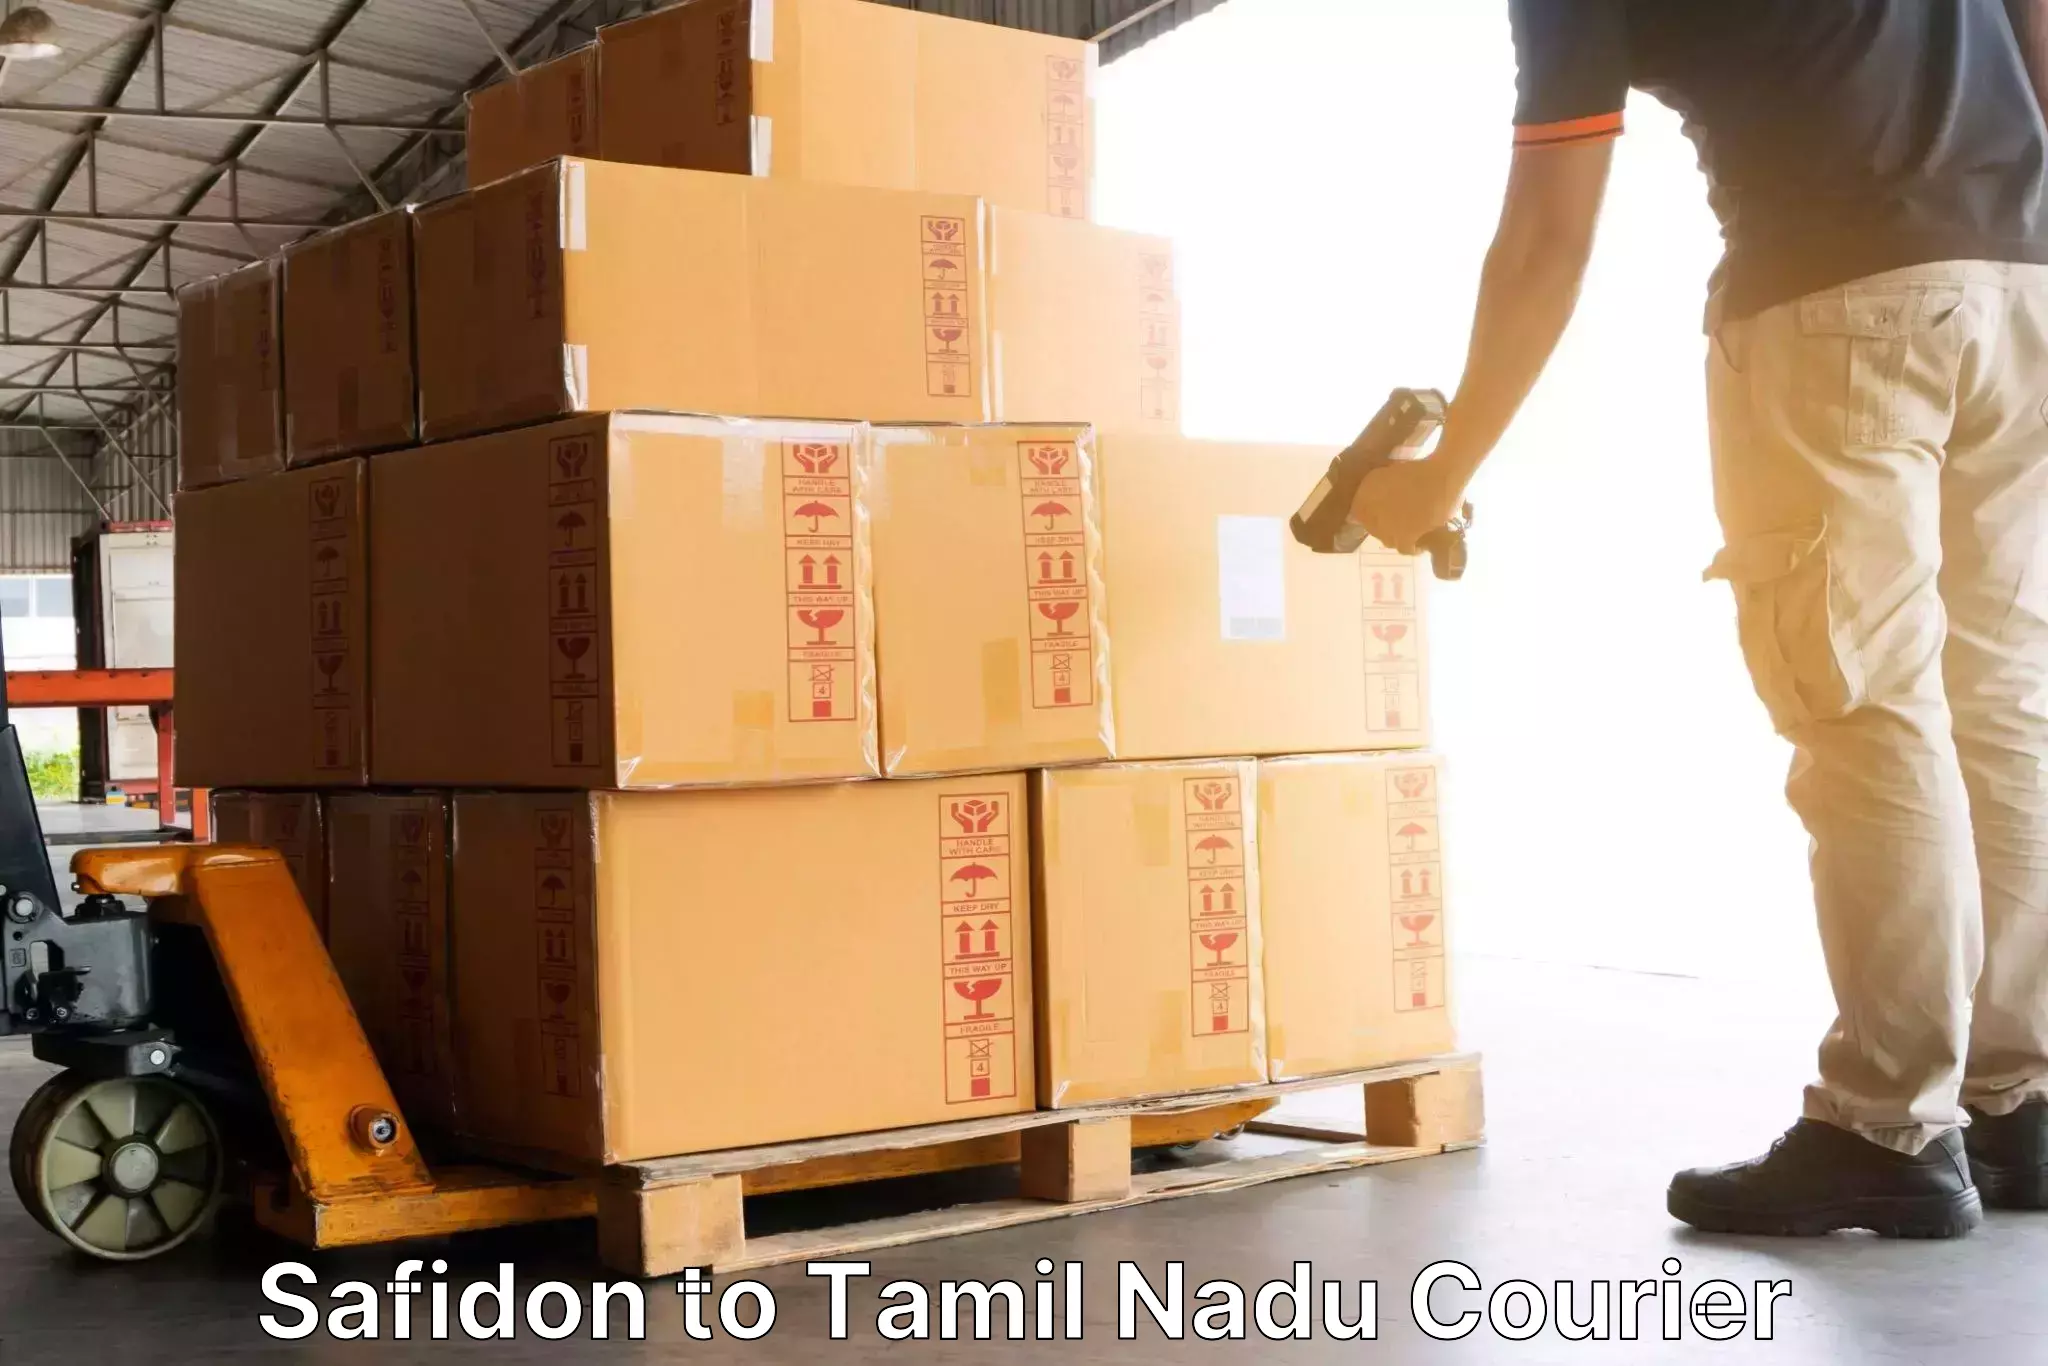 Nationwide courier service Safidon to Thiruthuraipoondi